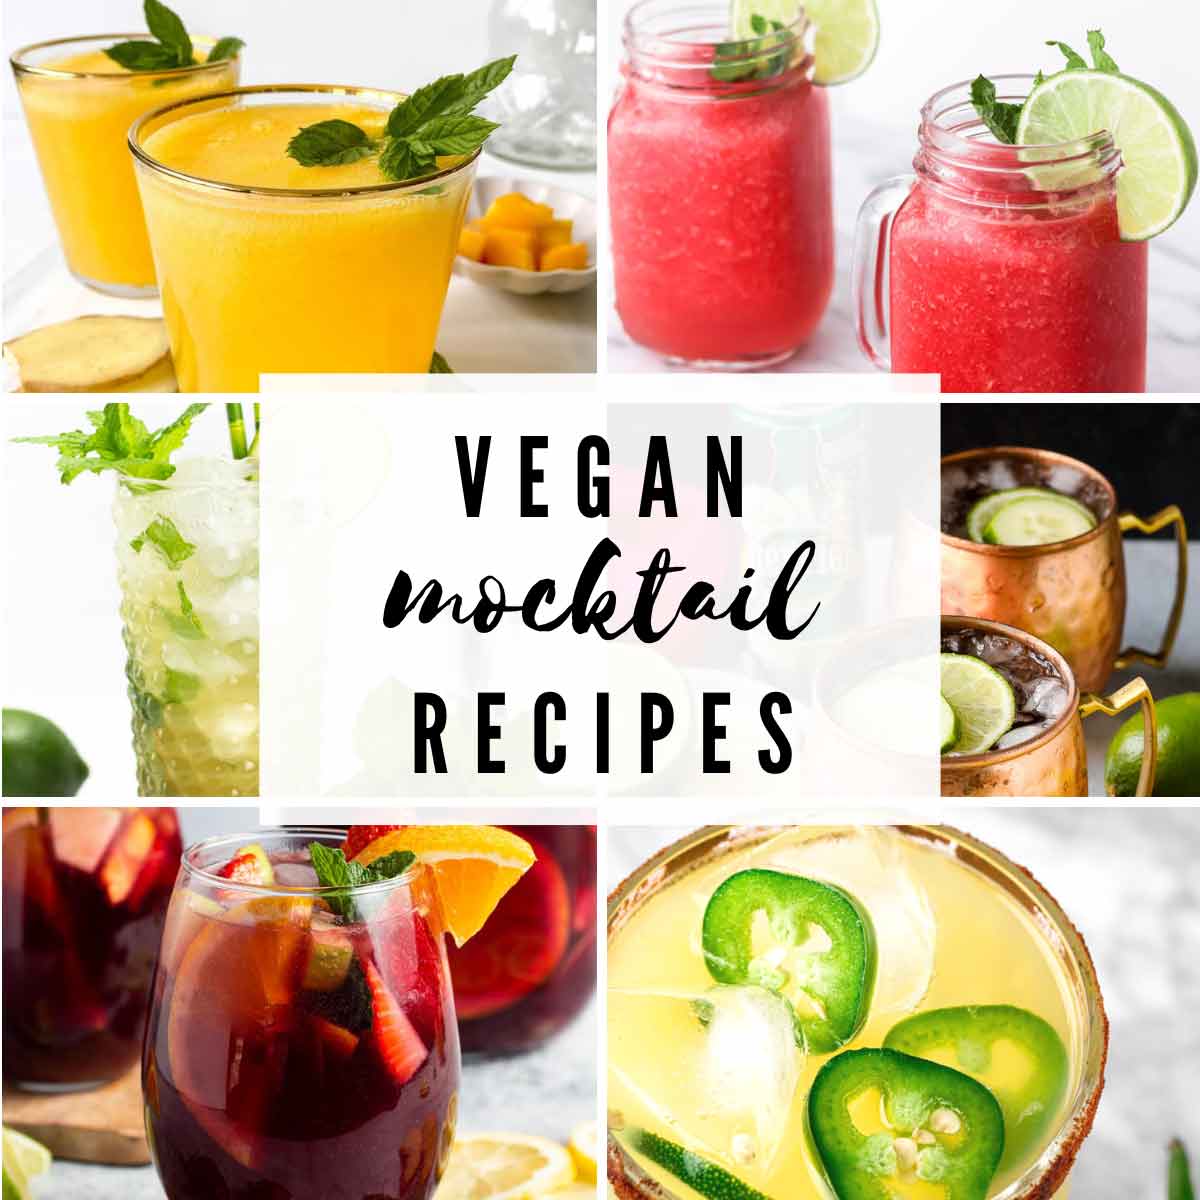 6 Images Of Vegan Mocktail Recipes With Text Overlay